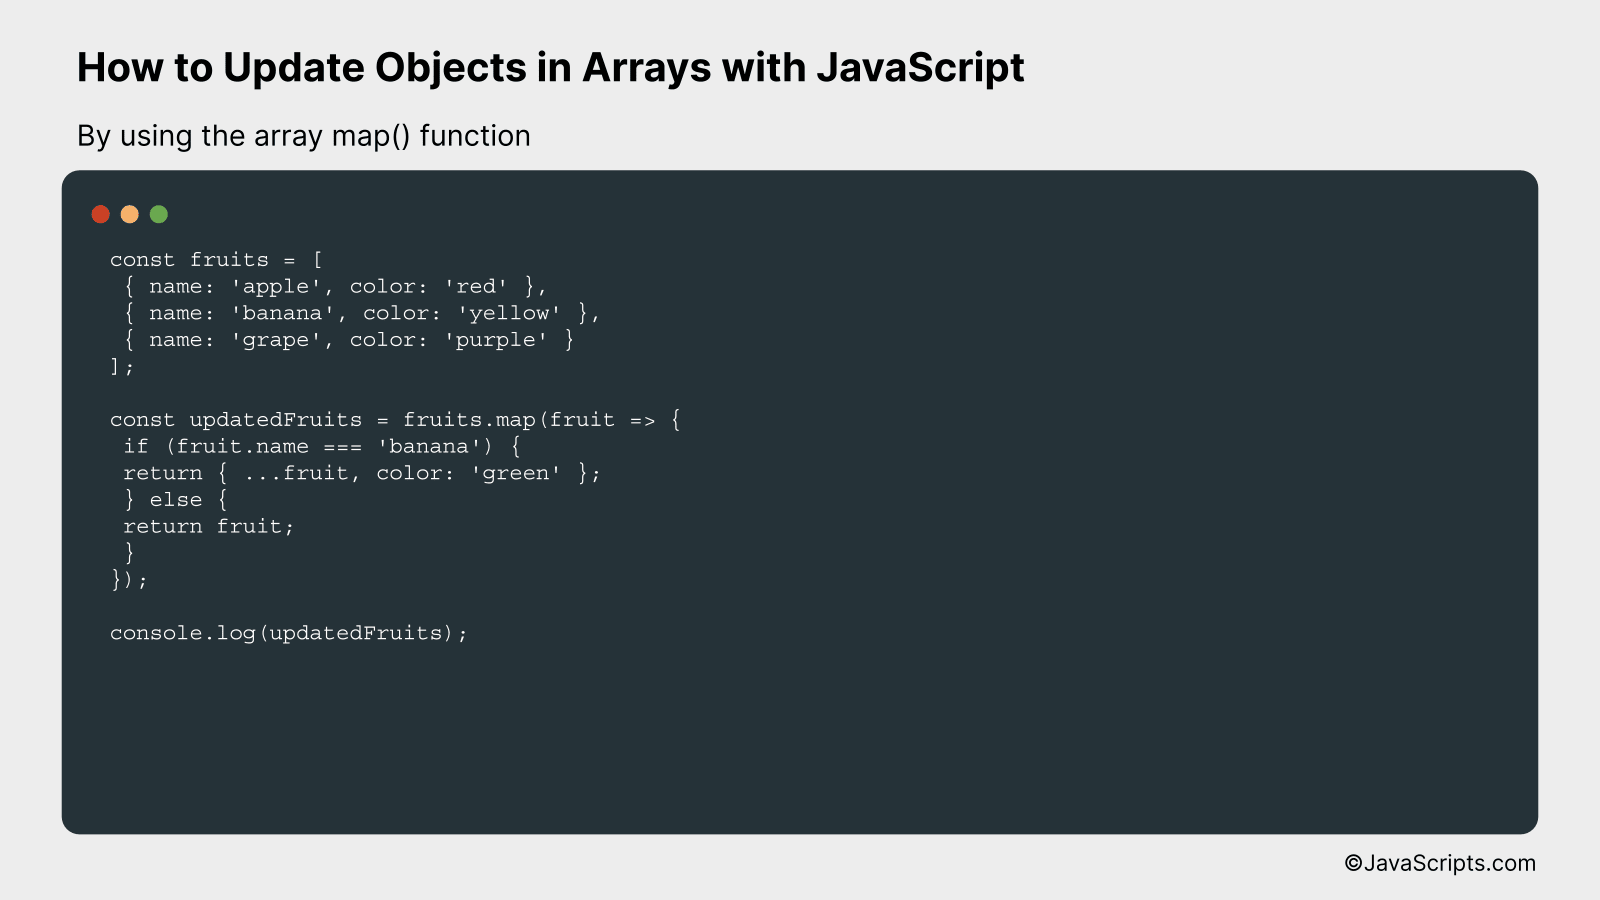 By using the array map() function